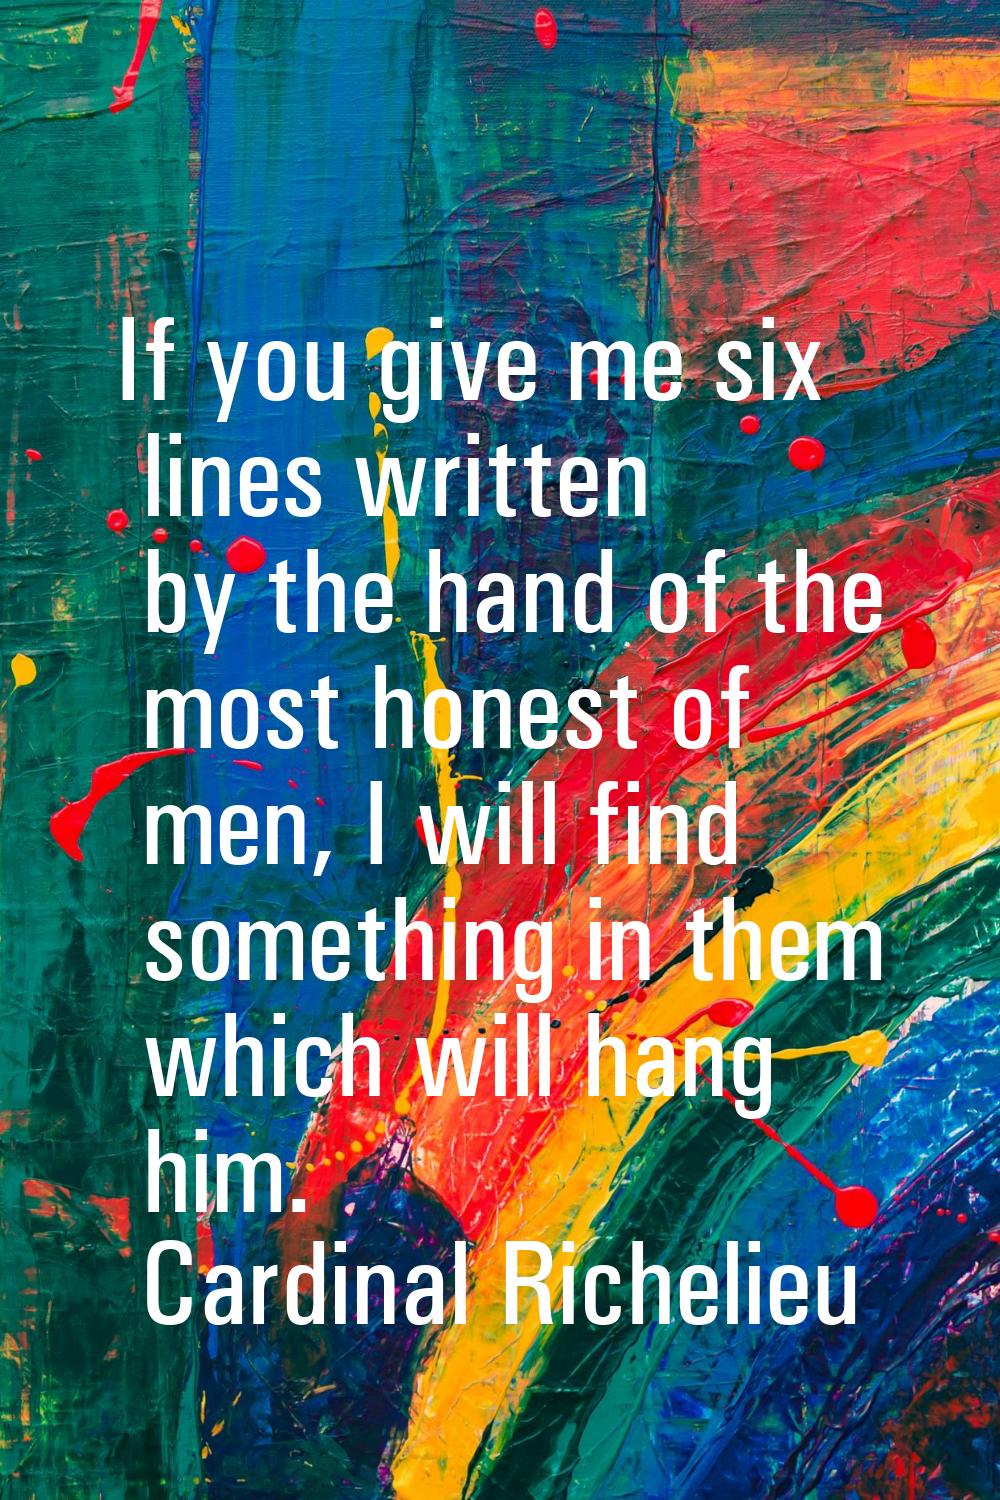 If you give me six lines written by the hand of the most honest of men, I will find something in th